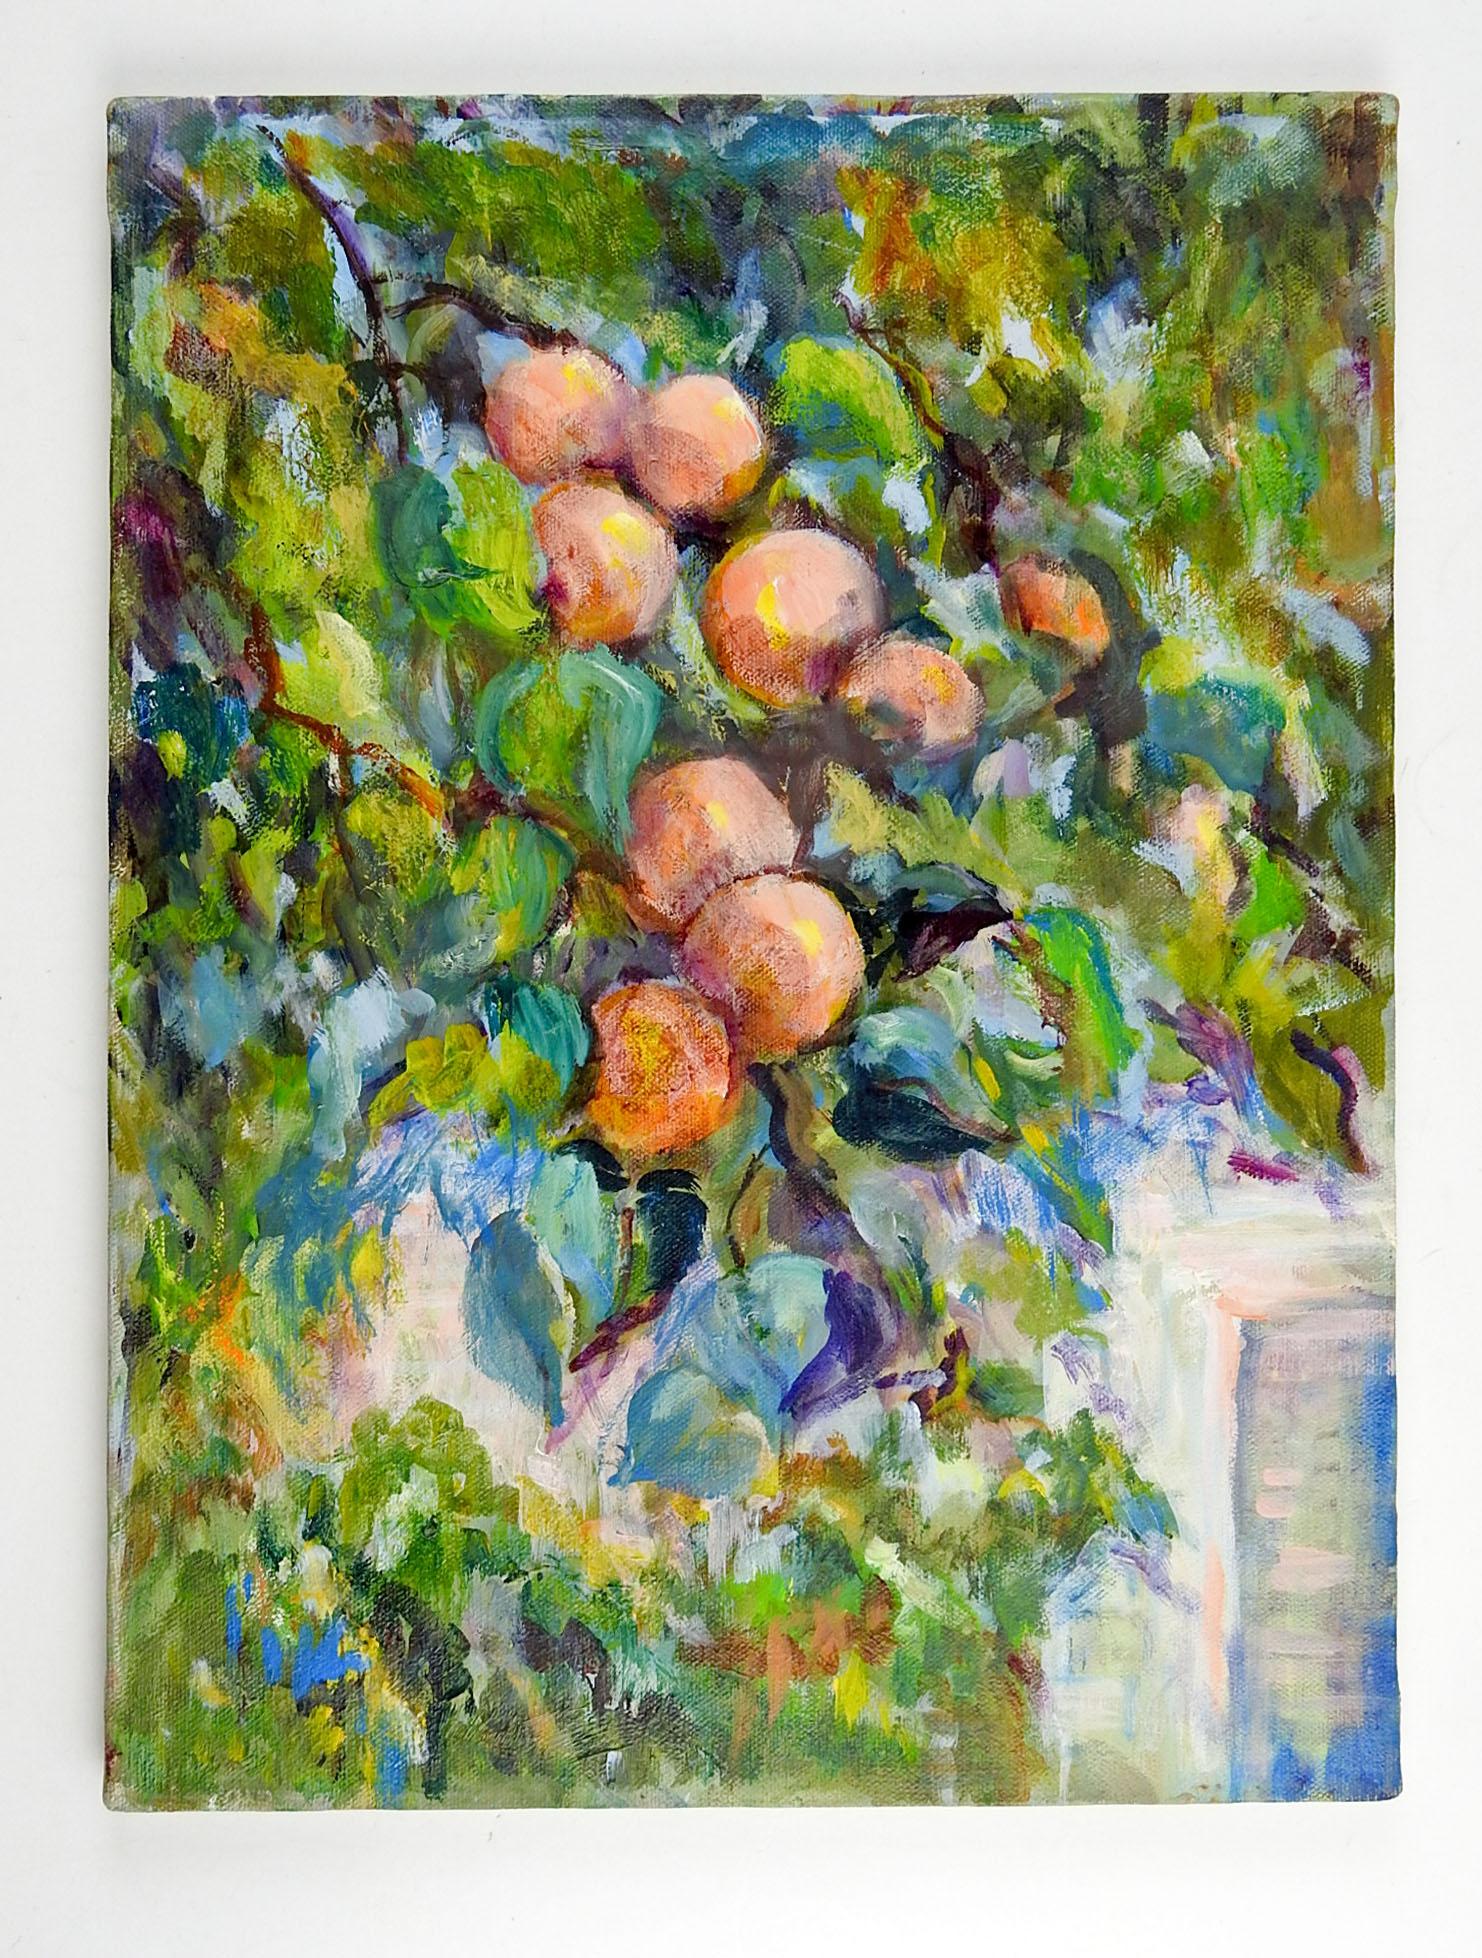 Oil on canvas impressionist painting of a fruit tree, maybe apples or peaches. Unsigned. Unframed.